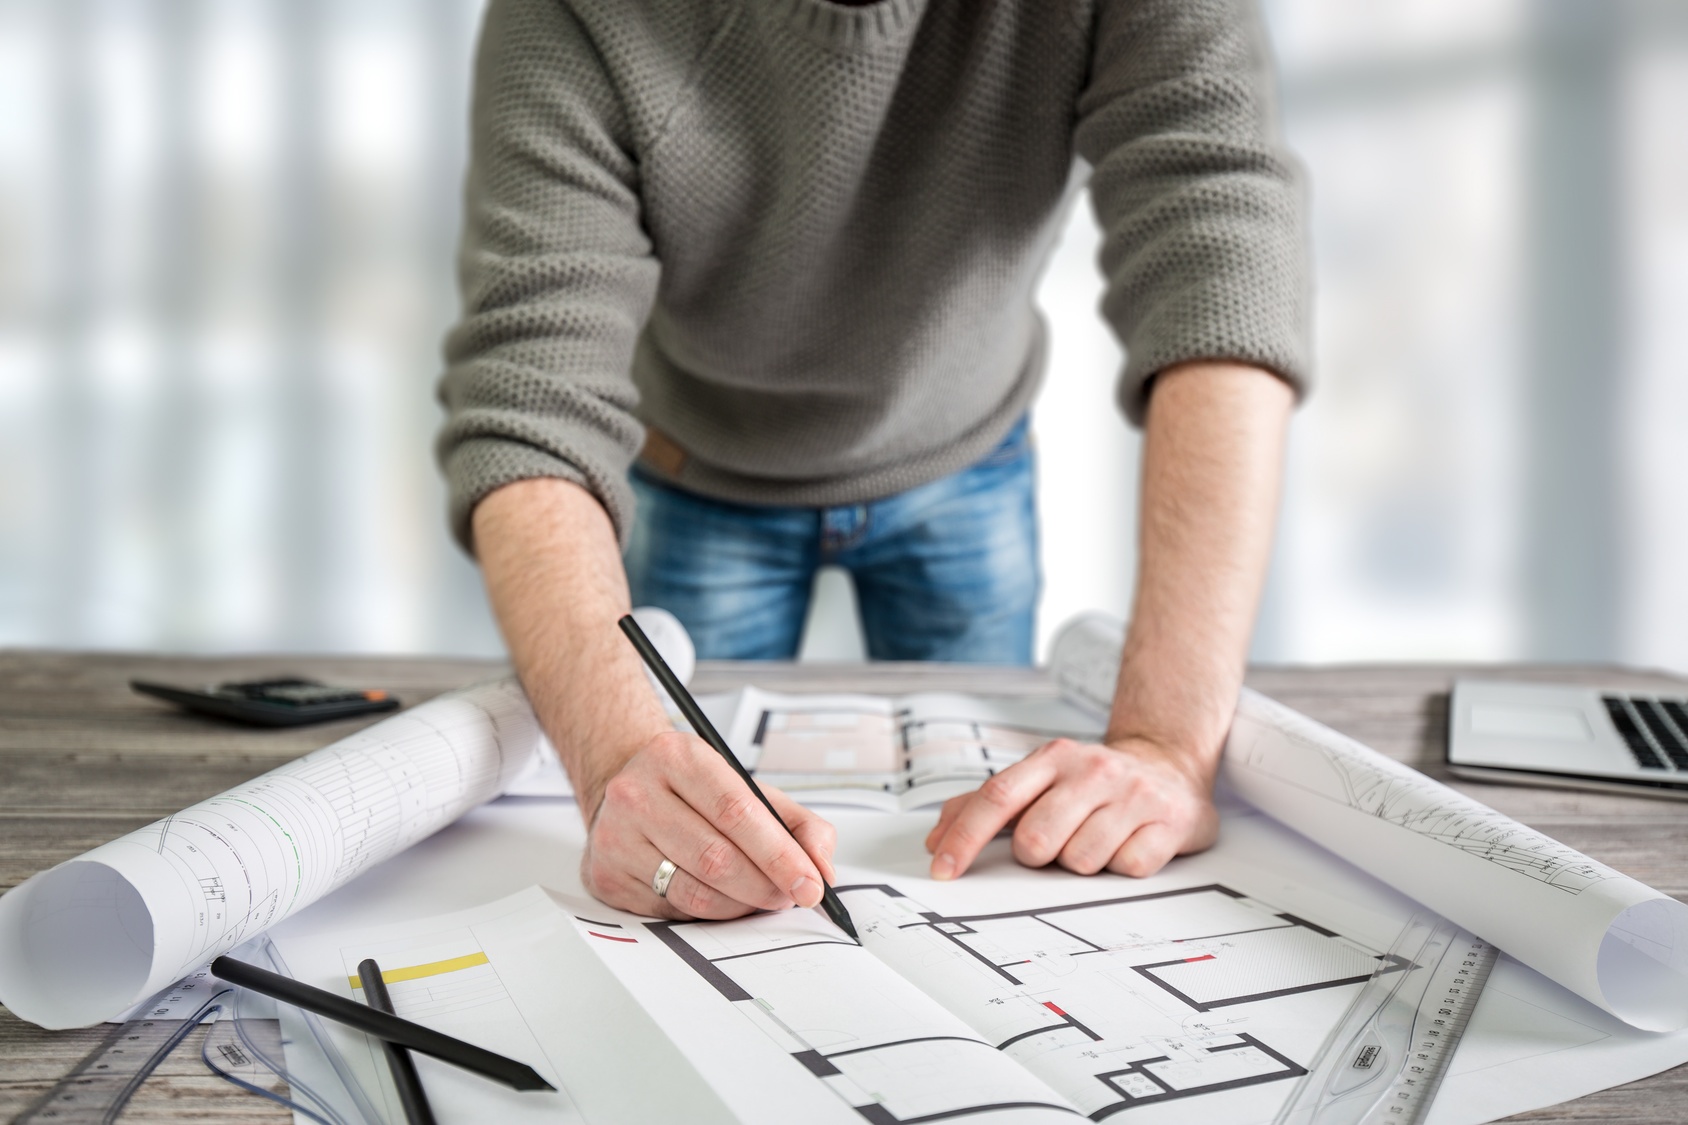 A man leaning over a set of architectural drawings